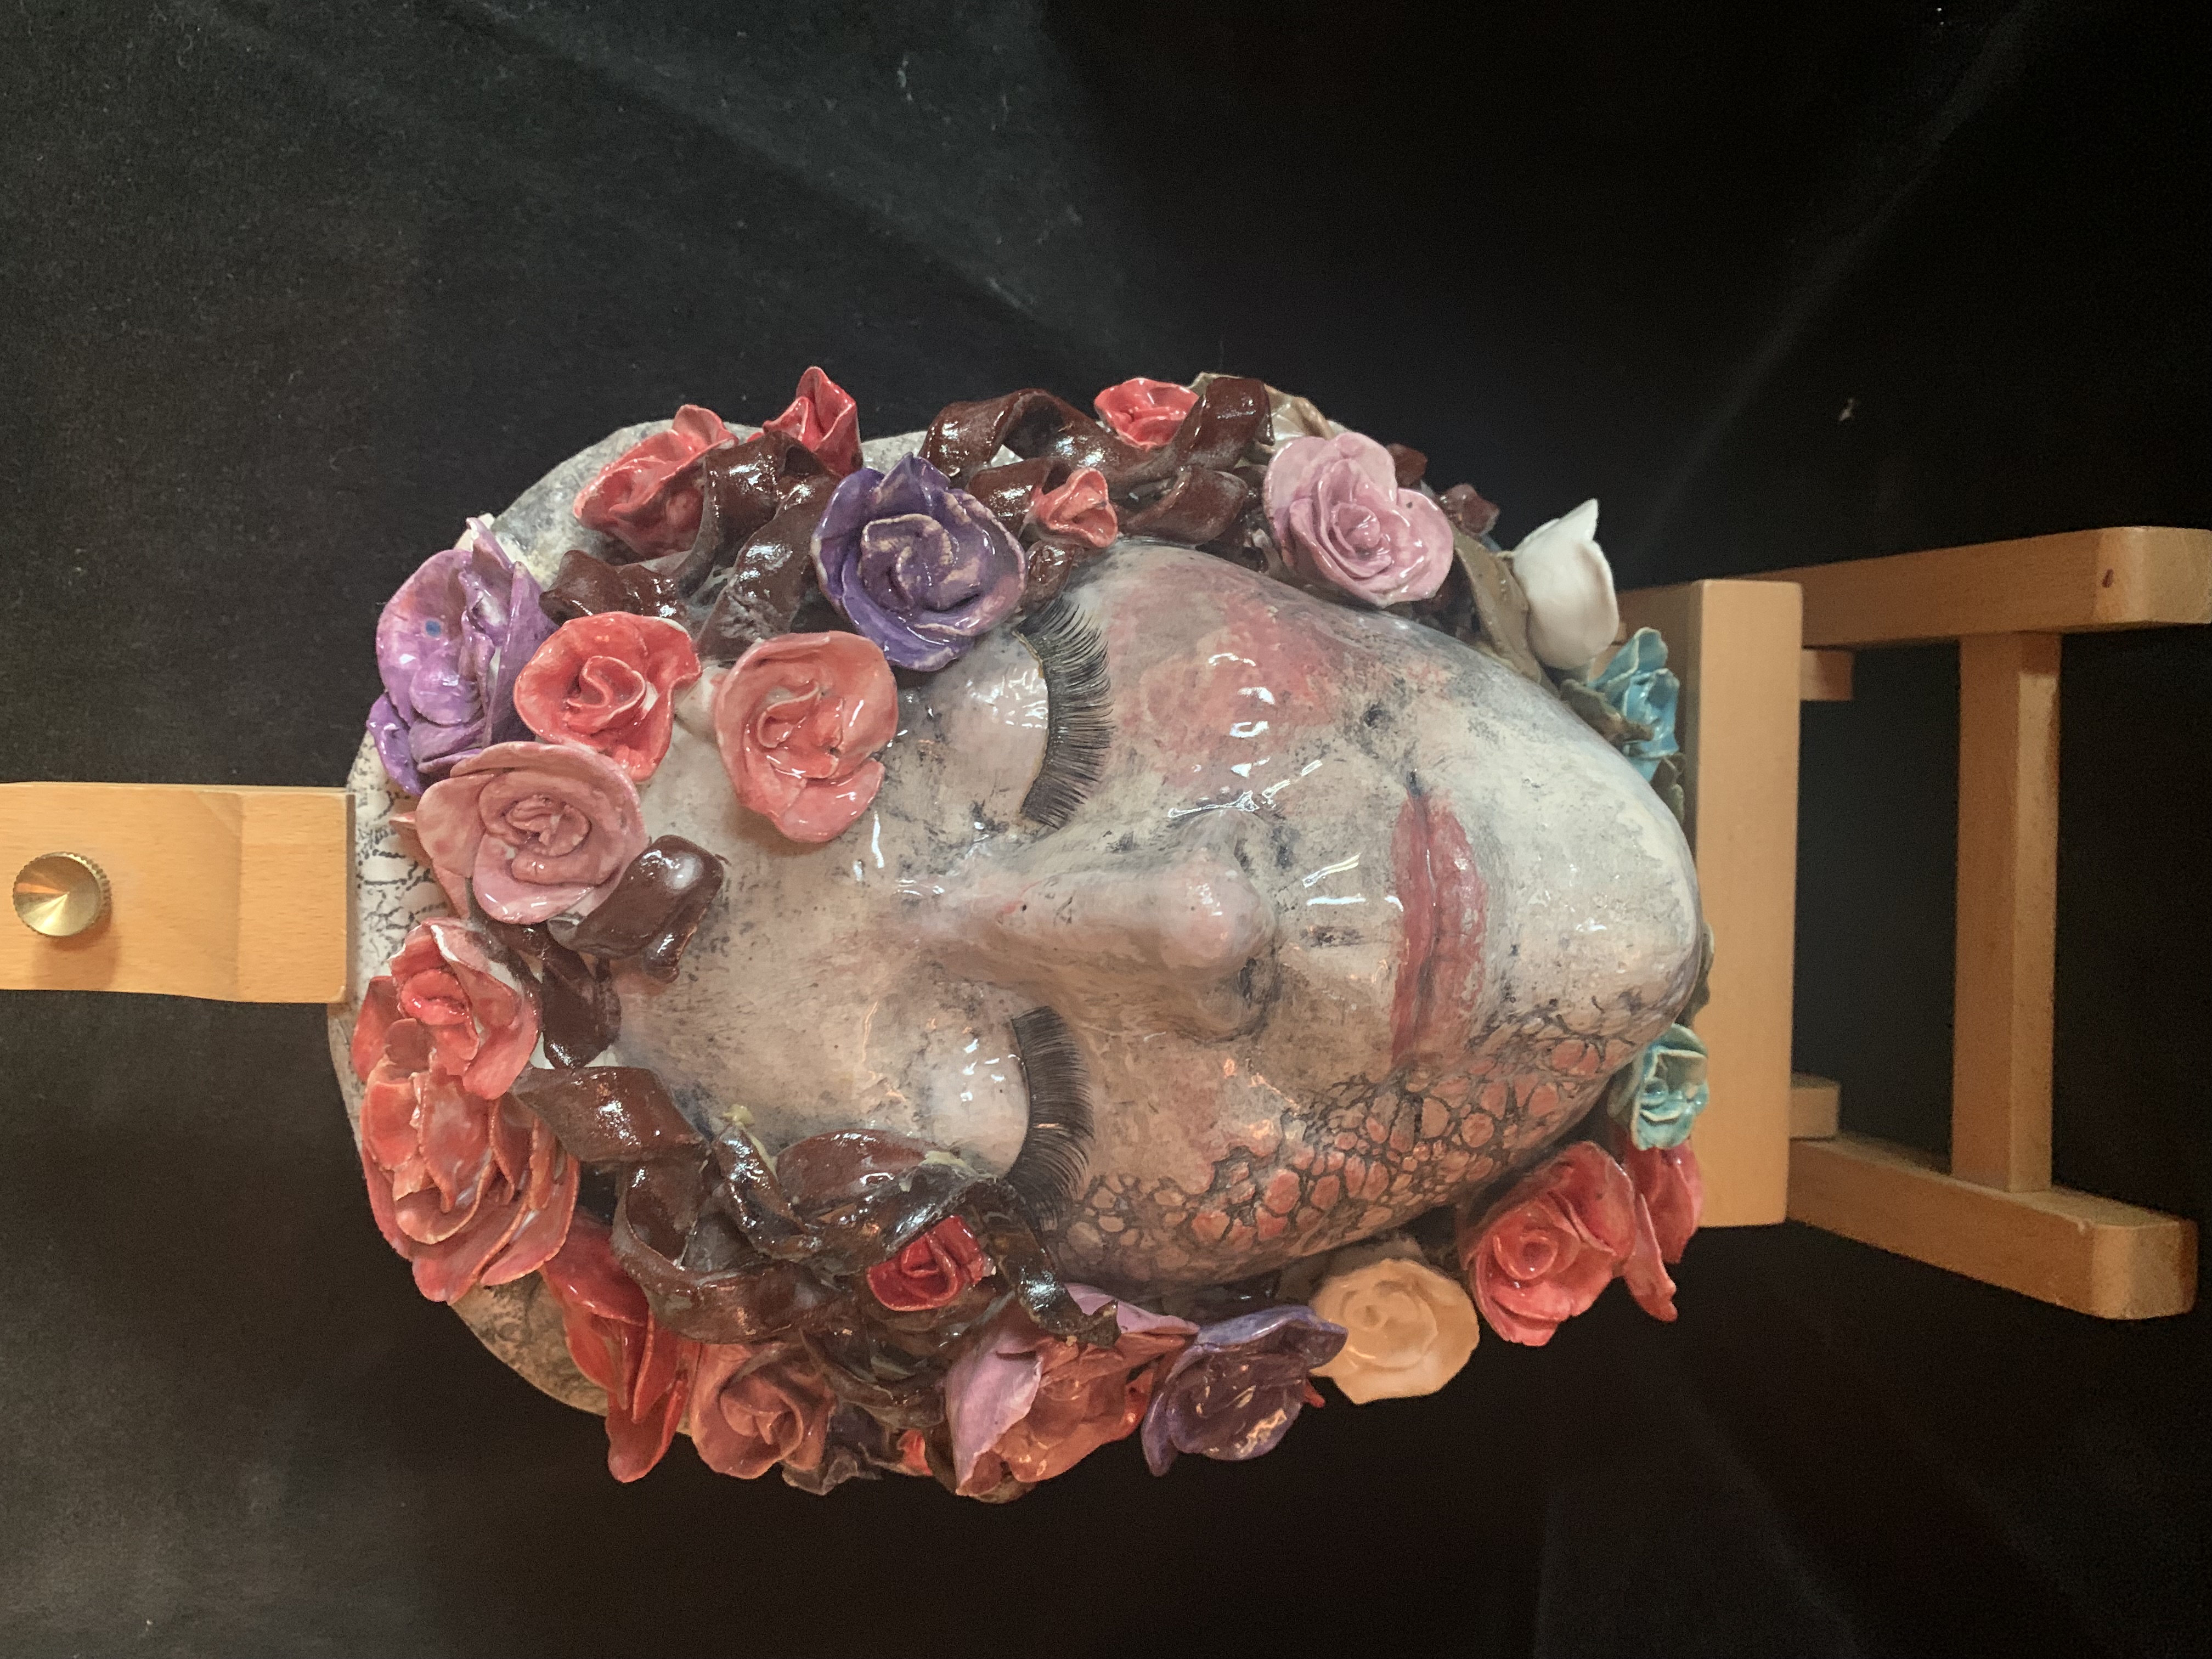 Porcelain face with closed eyes and red, purple, pink, brown flowers surrounding it sitting on a small pedestal with black background